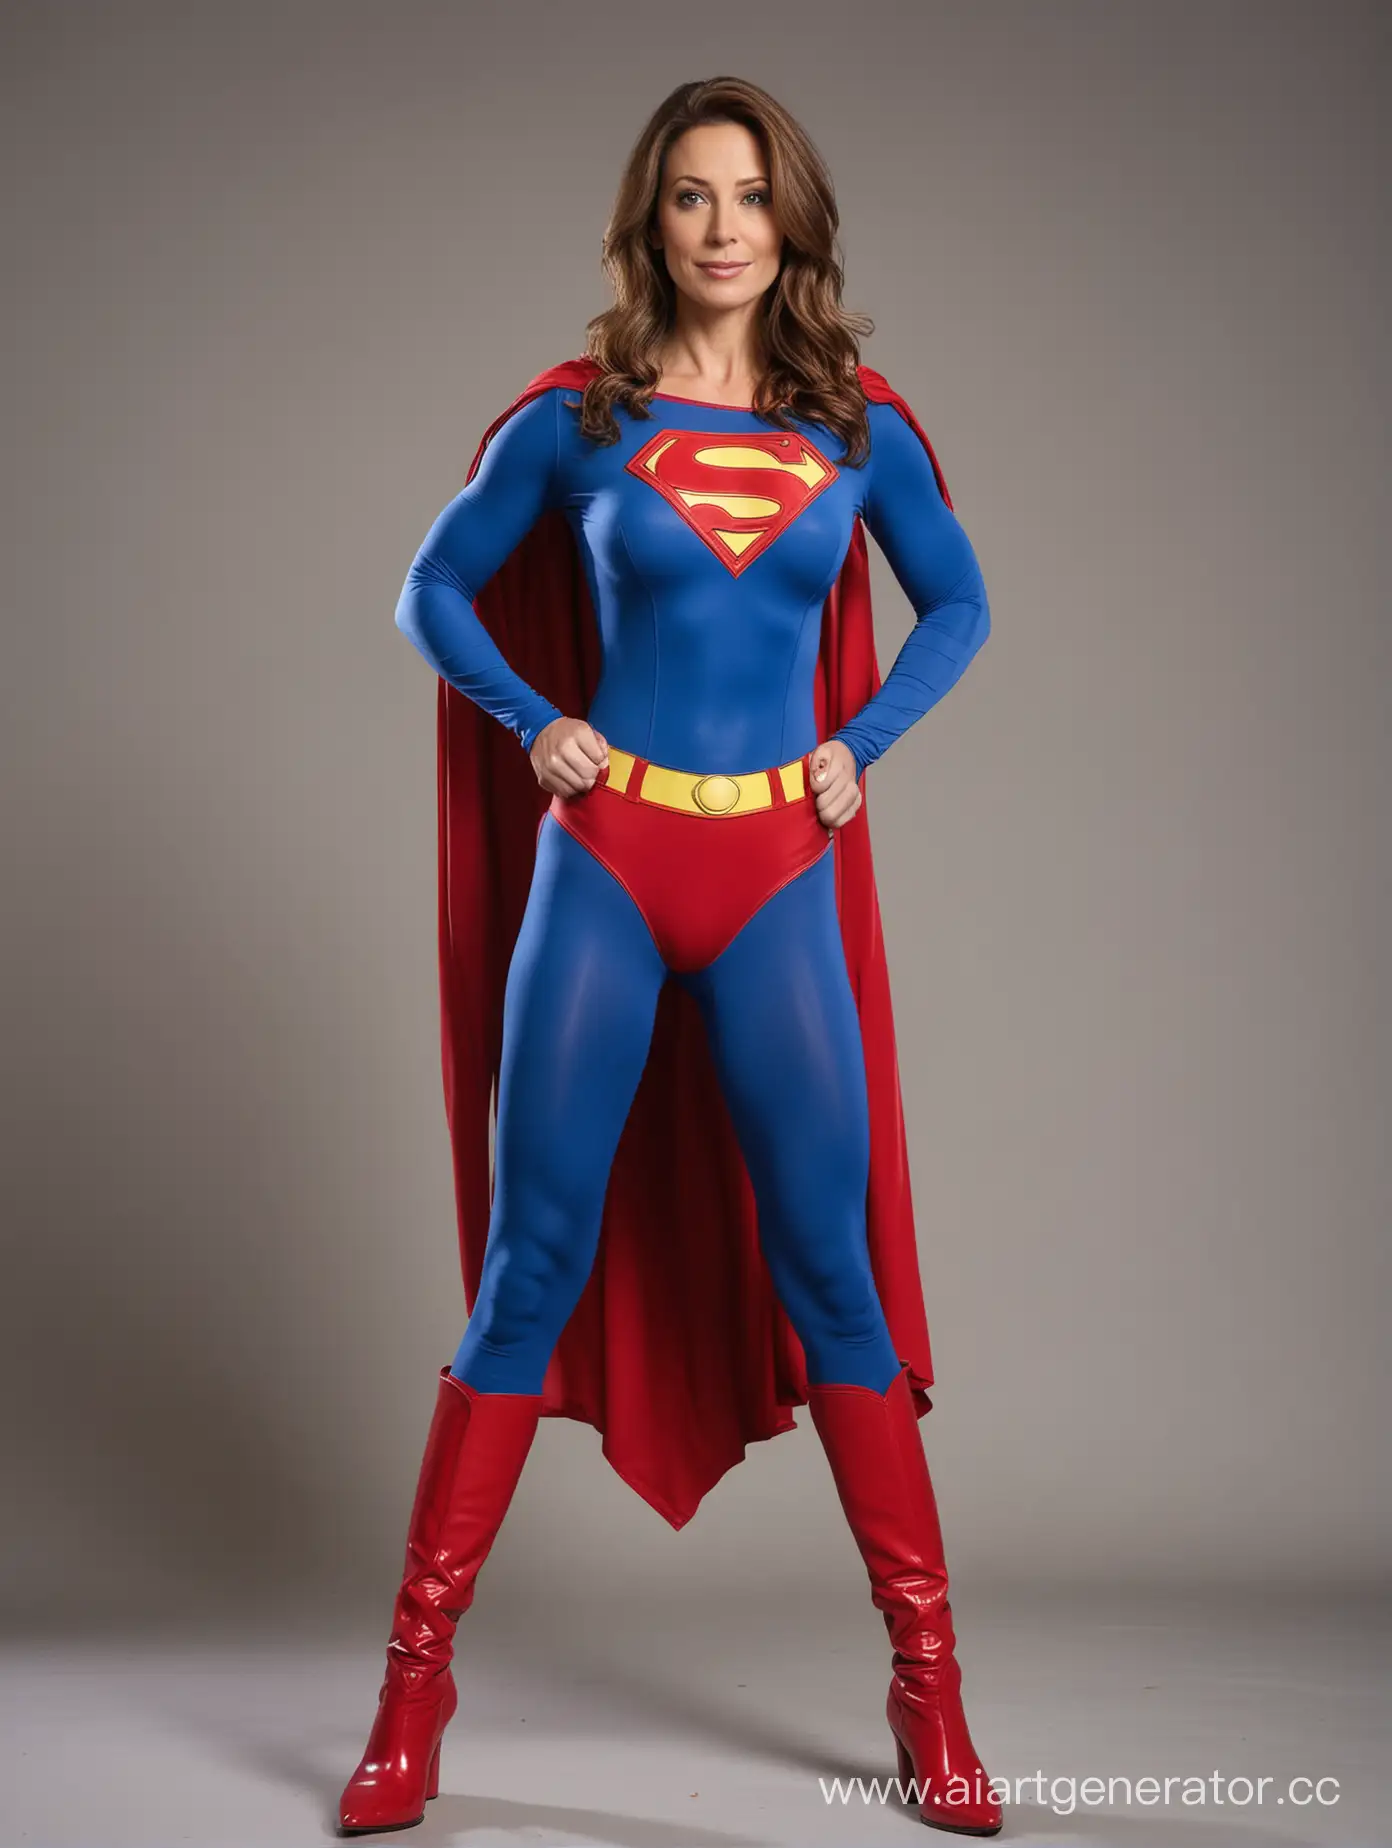 Confident-and-Heroic-Woman-in-Classic-Superman-Costume